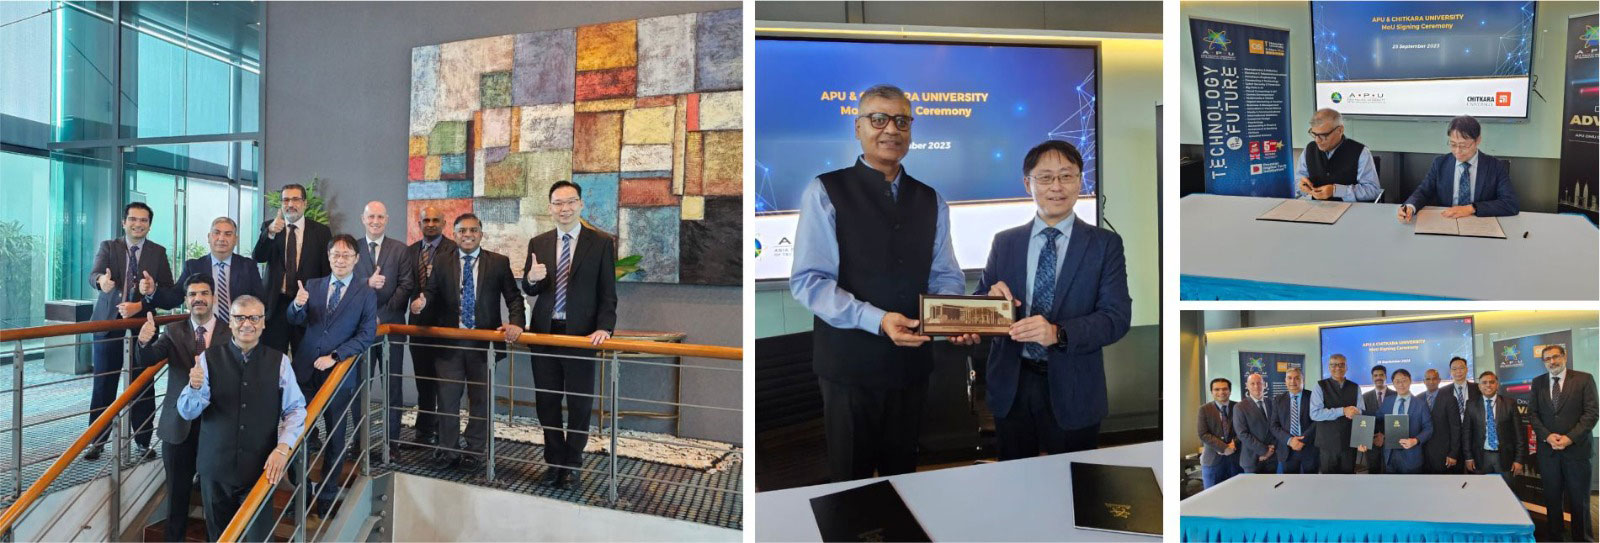 MoU represents a step forward for Chitkara University and Asia Pacific University